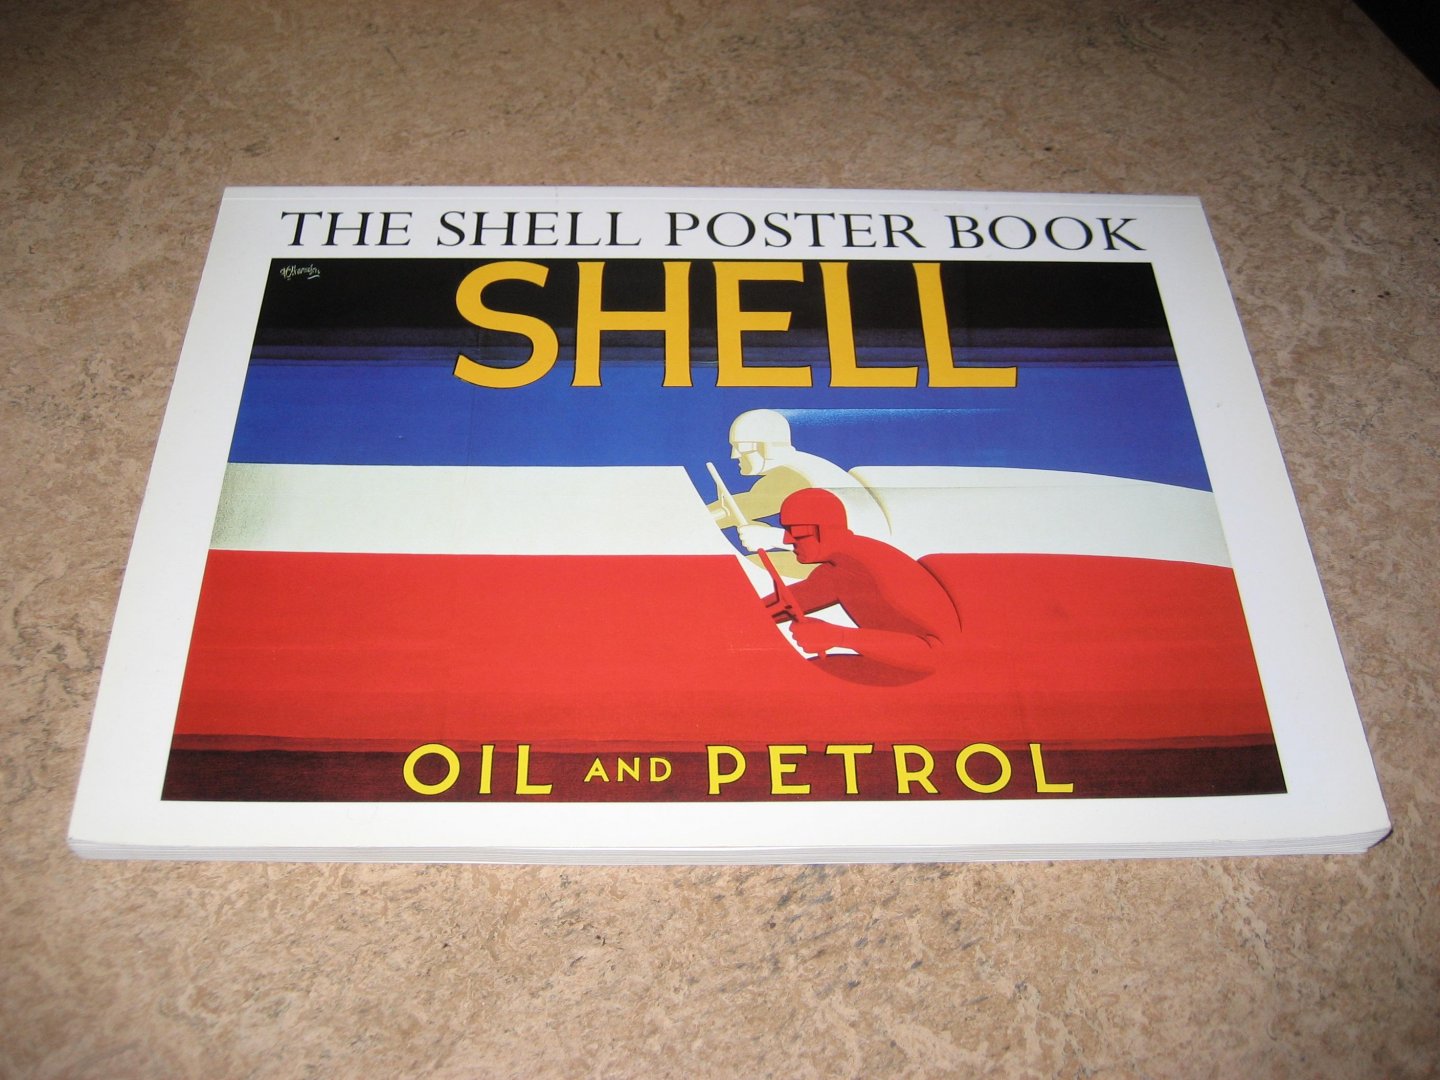 Hewitt, John (introduction) | Foreword by lord Montagu of Beaulieu - The Shell Poster Book